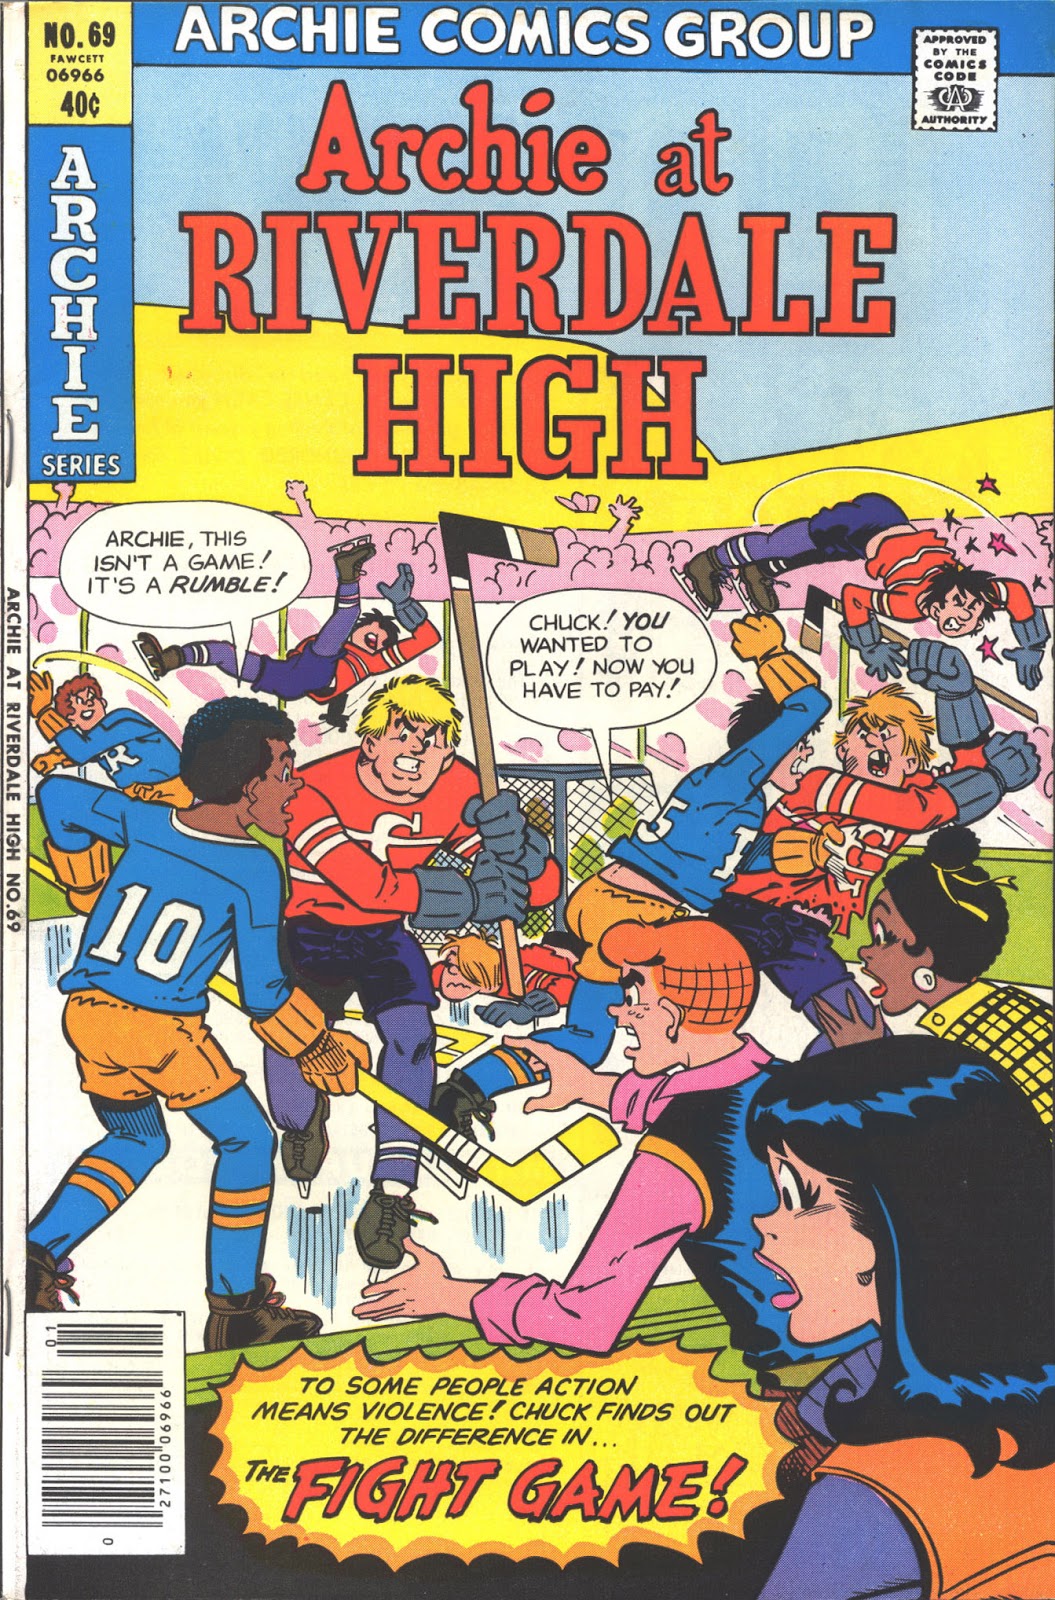 Archie at Riverdale High (1972) 69 Page 1